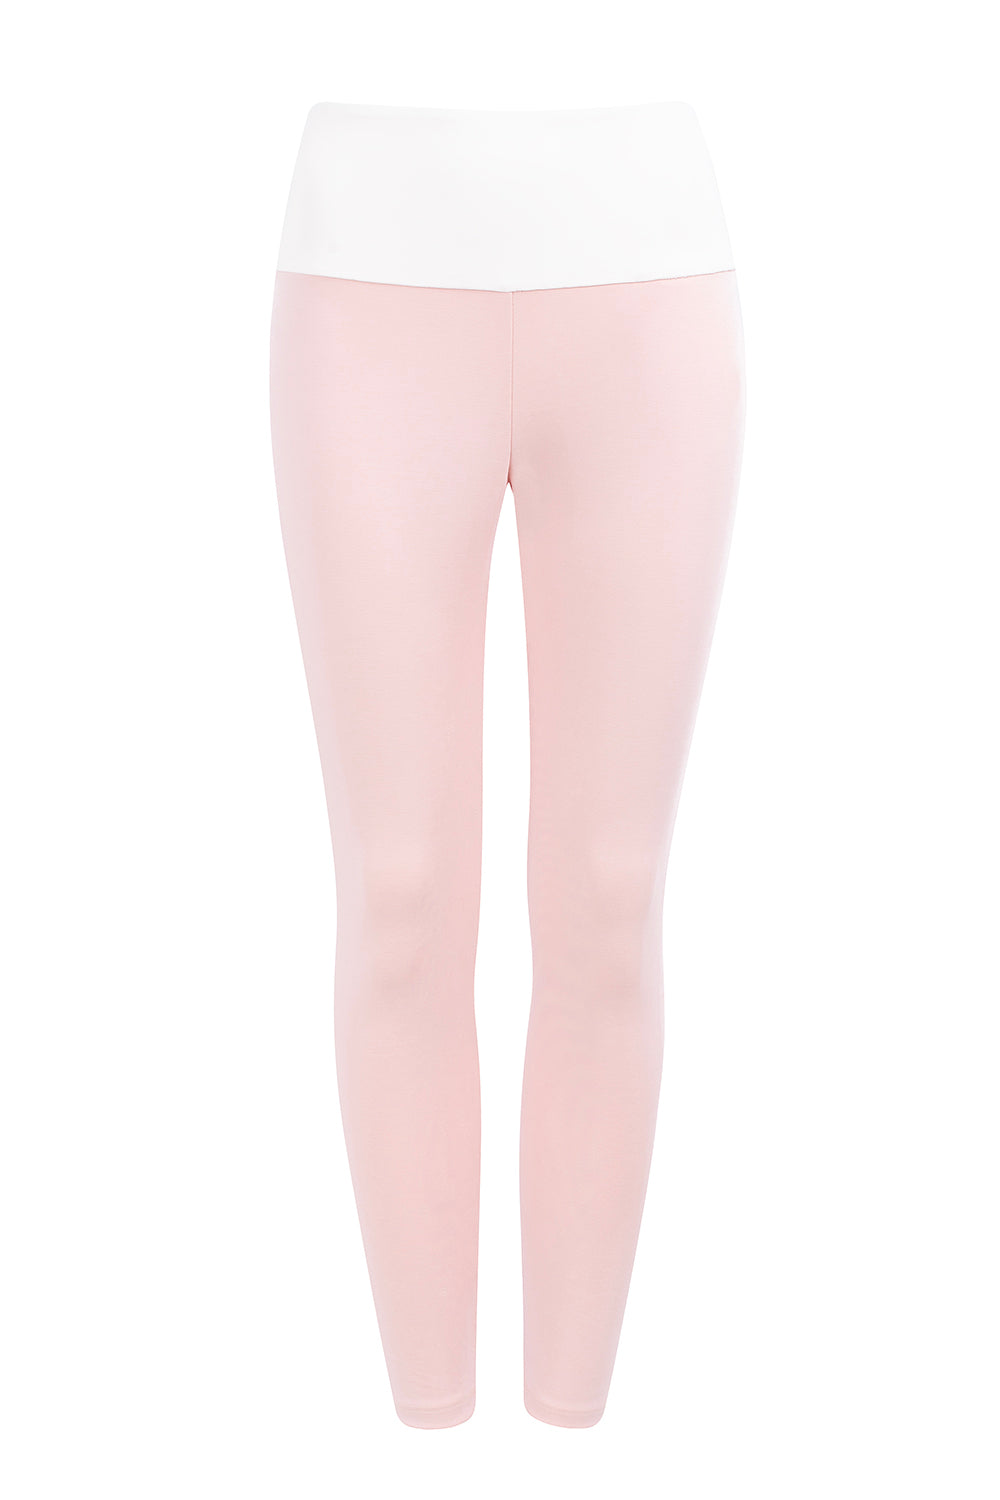 SOFT TOUCH PINK LEGGINGS – Missus